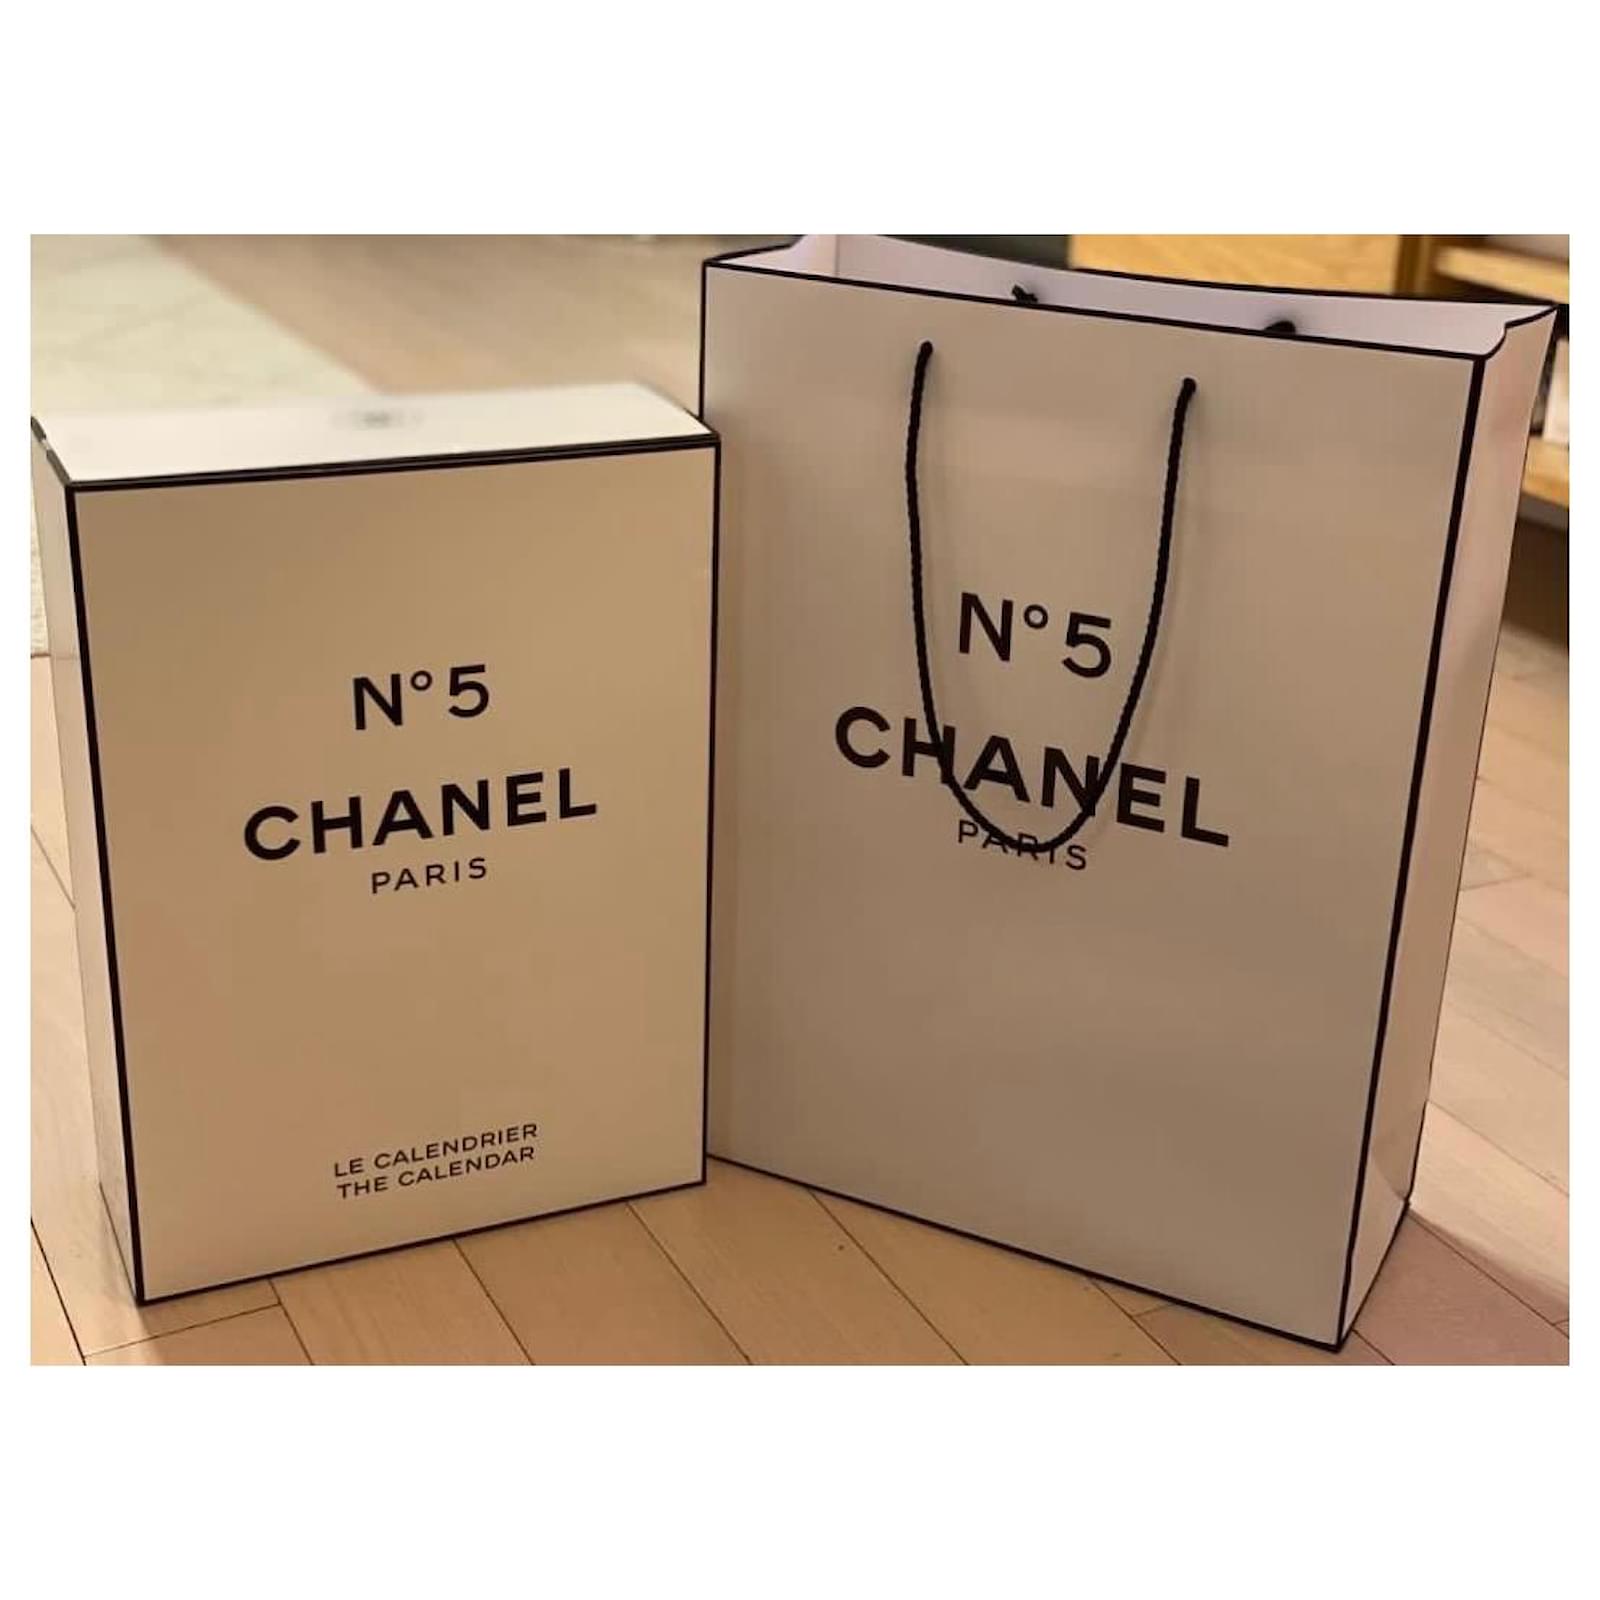 CHANEL ADVENT CALENDAR 2021 - Limited Edition  *Most Expensive & Very  Limited Quantities* 469 ℳ.ℳ ♛ 